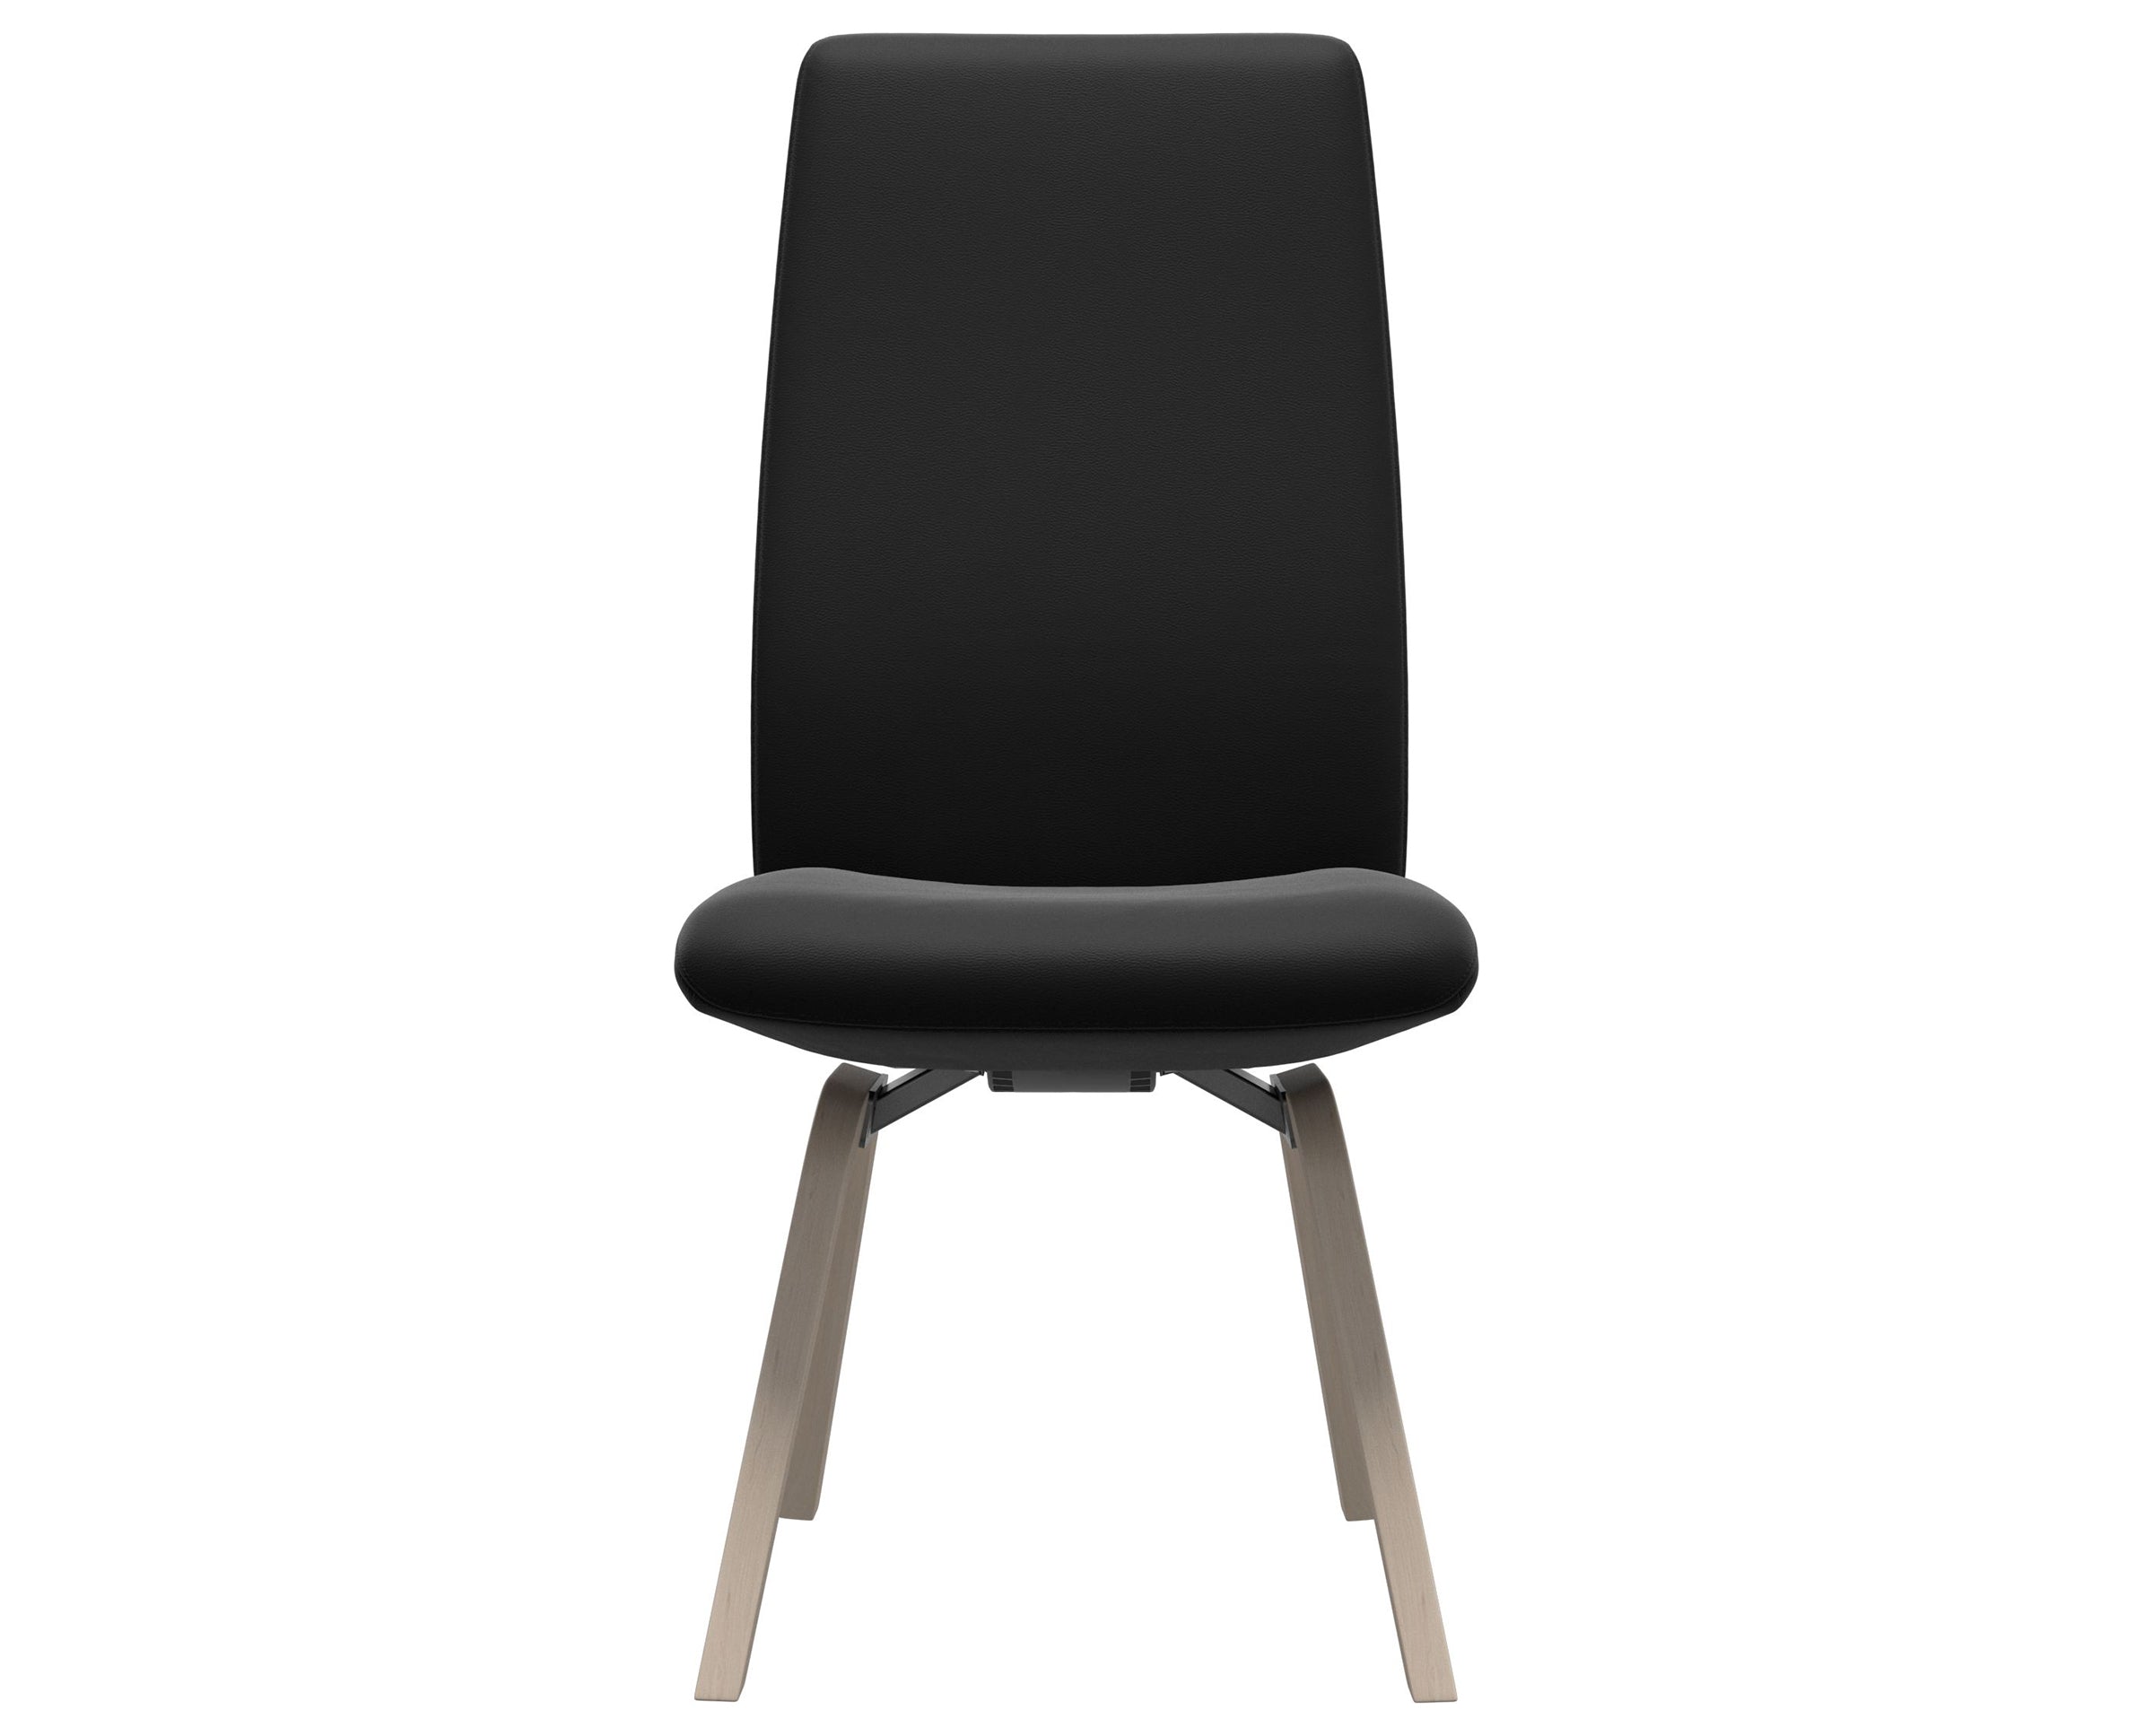 Paloma Leather Black and Whitewash Base | Stressless Laurel High Back D200 Dining Chair | Valley Ridge Furniture